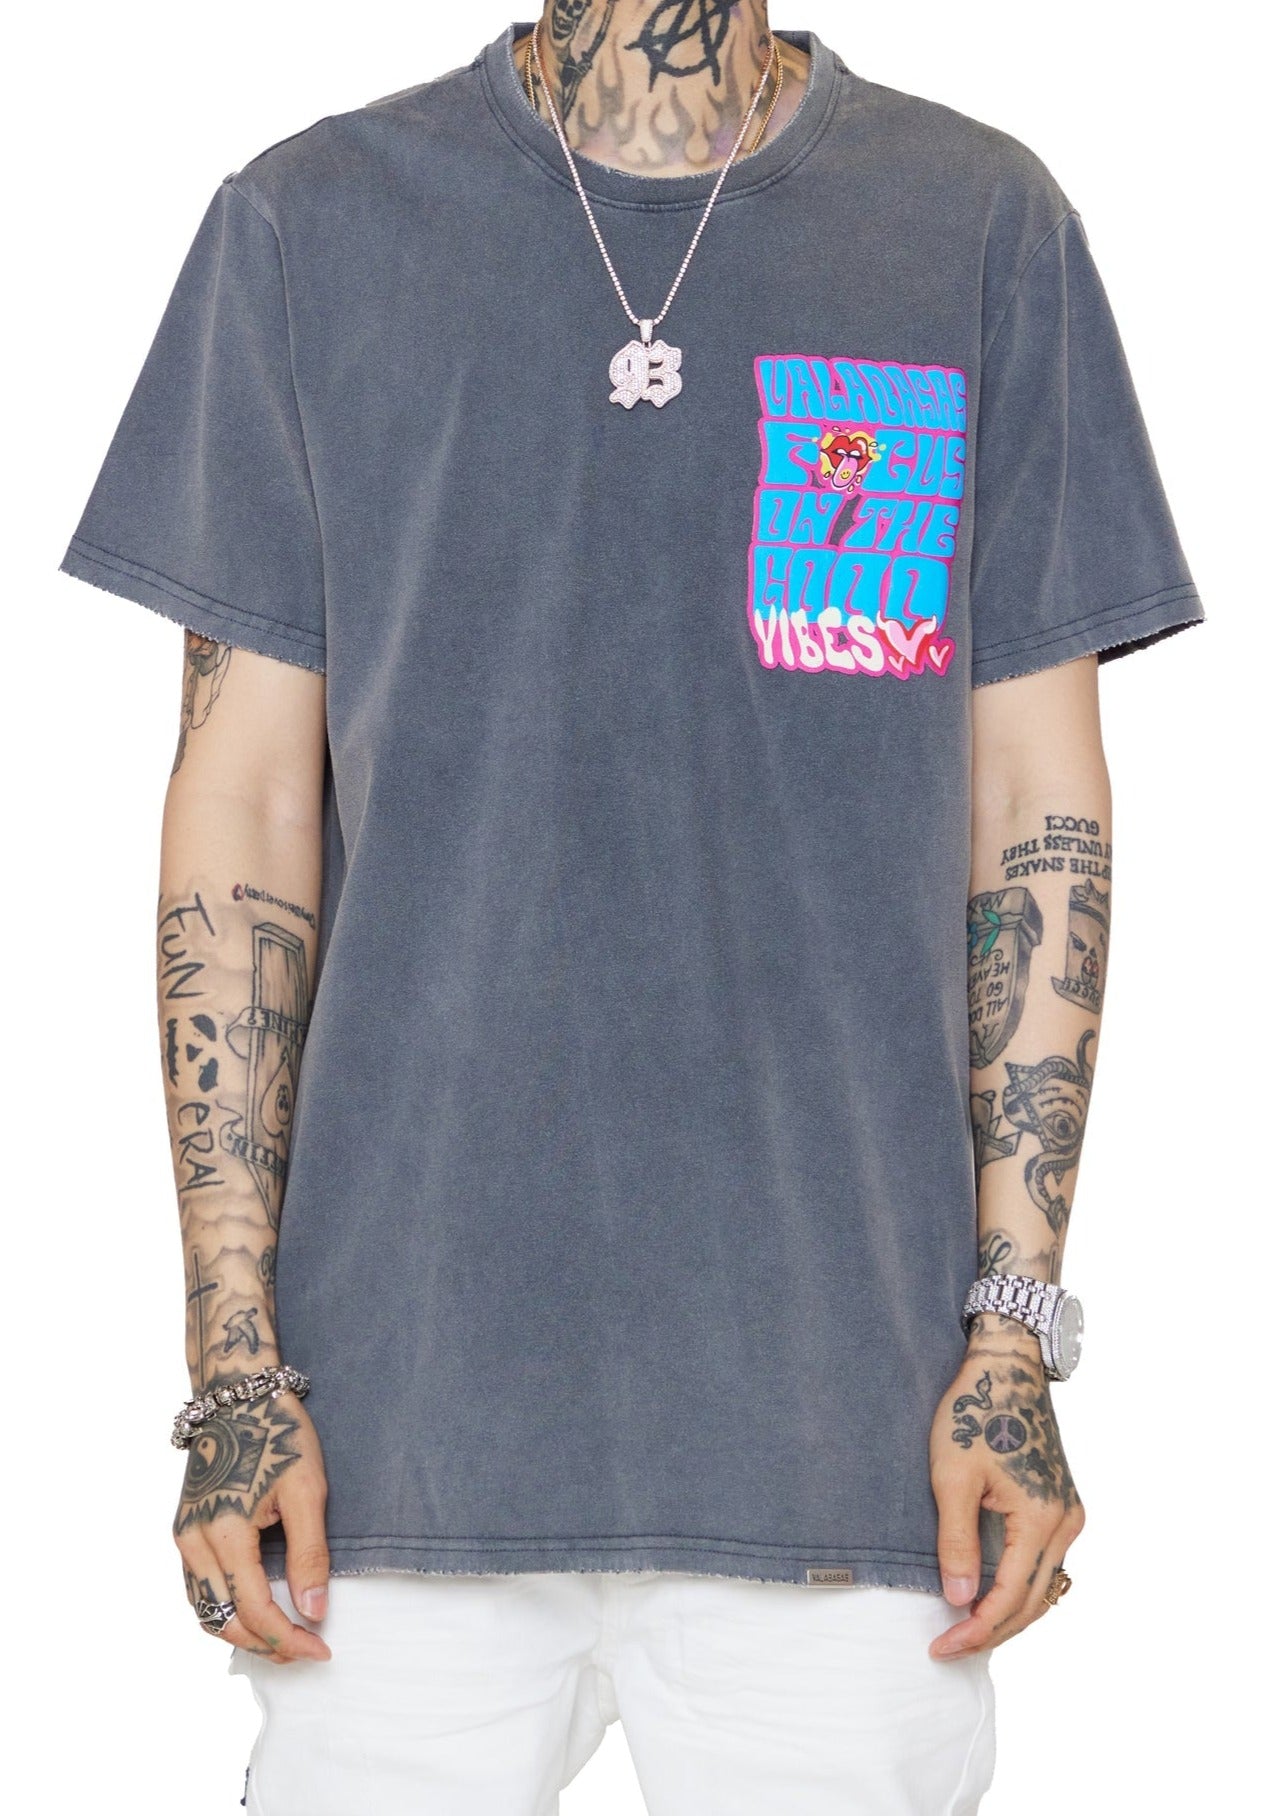 VALABASAS "GOOD VIBES" Tee features a BLOODY PANTHER graphic in a VINTAGE GREY color